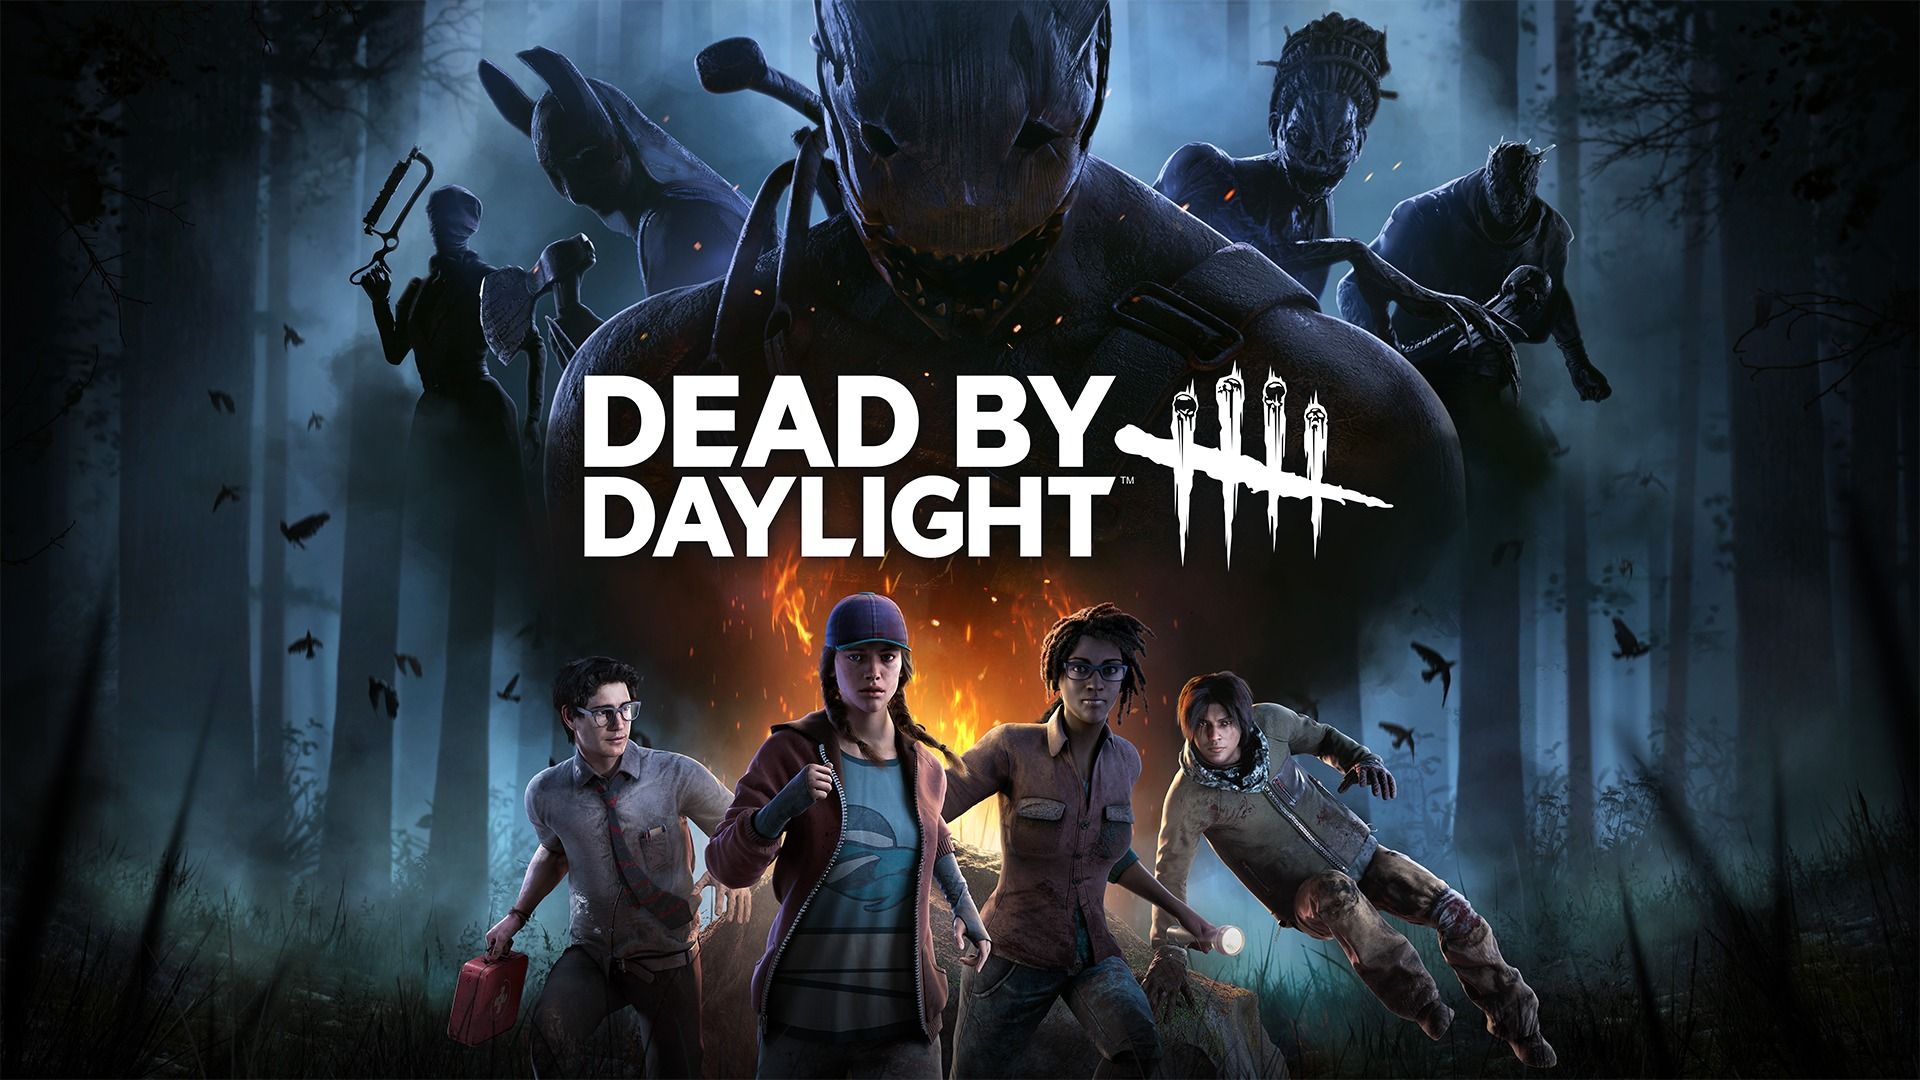 Dead By Daylight (DBD) Update 5.7.0 Patch Notes Today, April 27